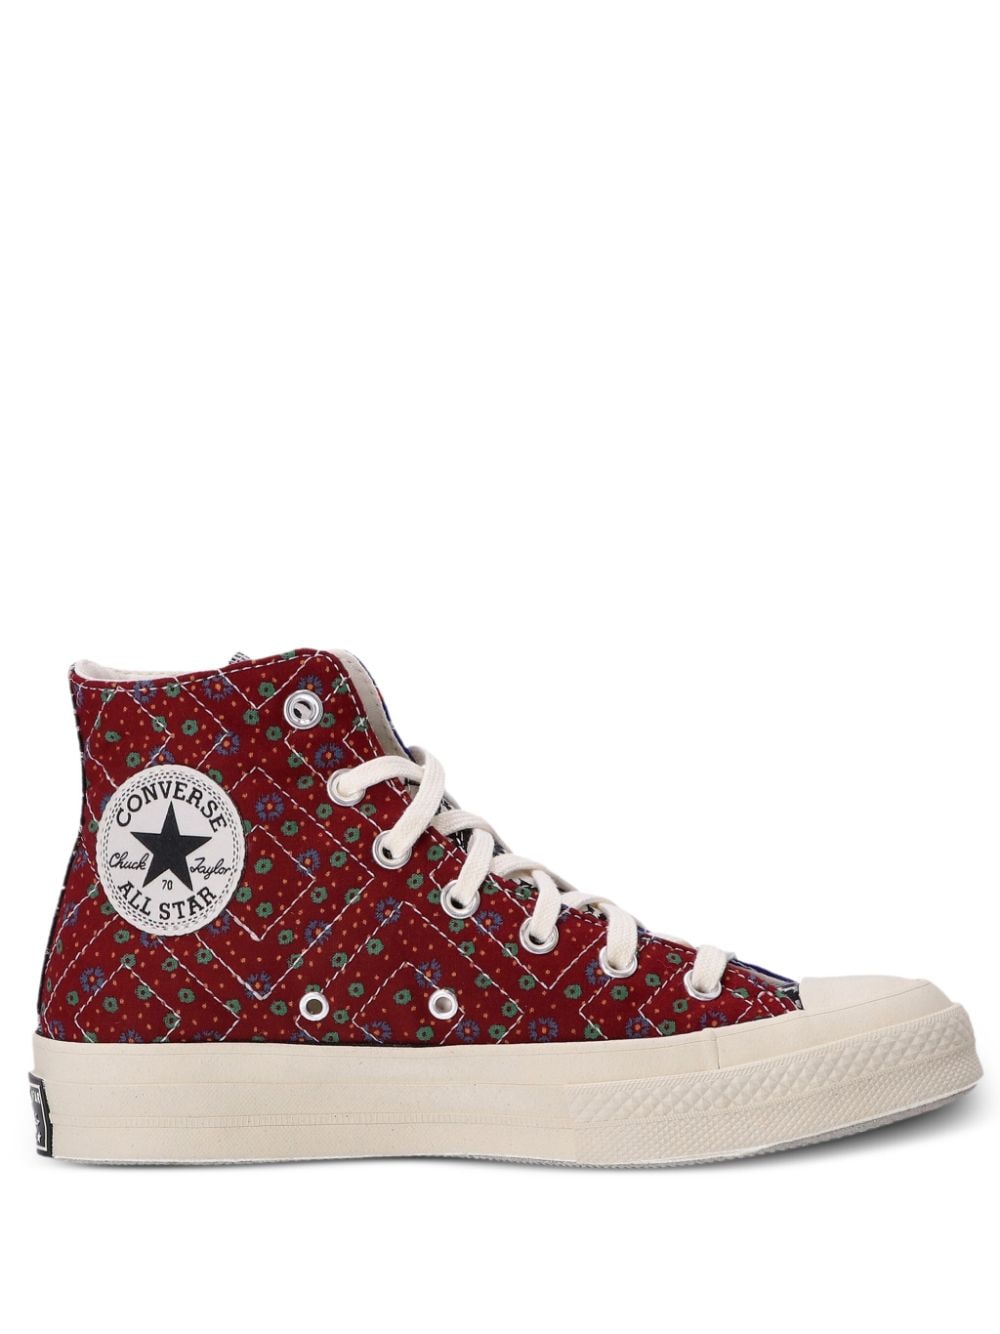 Converse x Beyond Retro Chuck 70 lace-up sneakers - Red von Converse